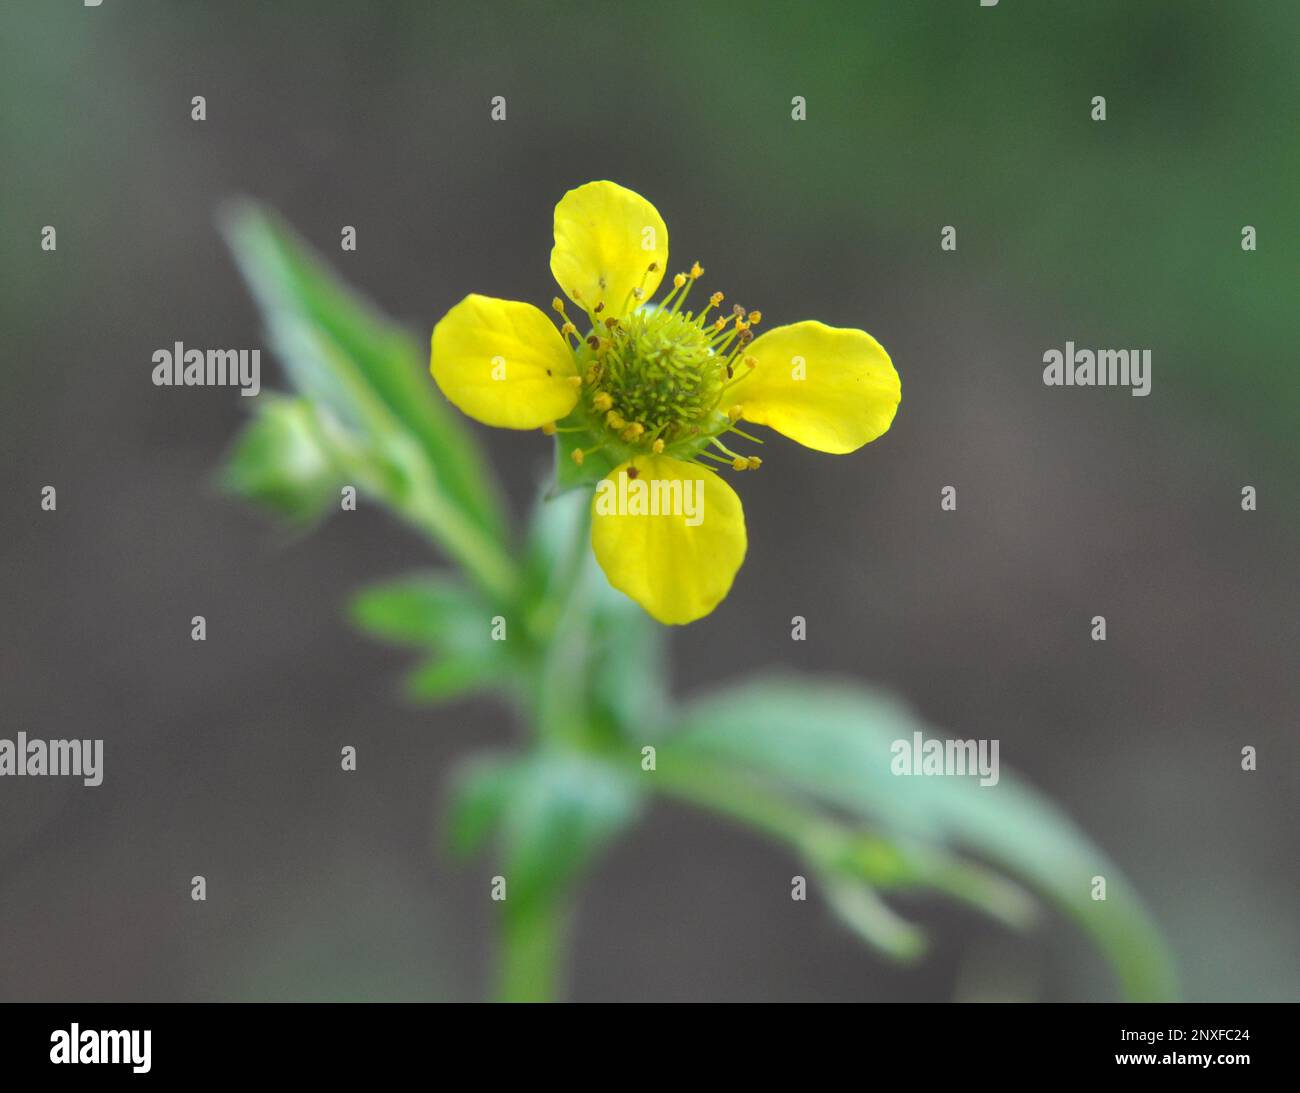 Geum urbanum grows in the wild among grasses Stock Photo